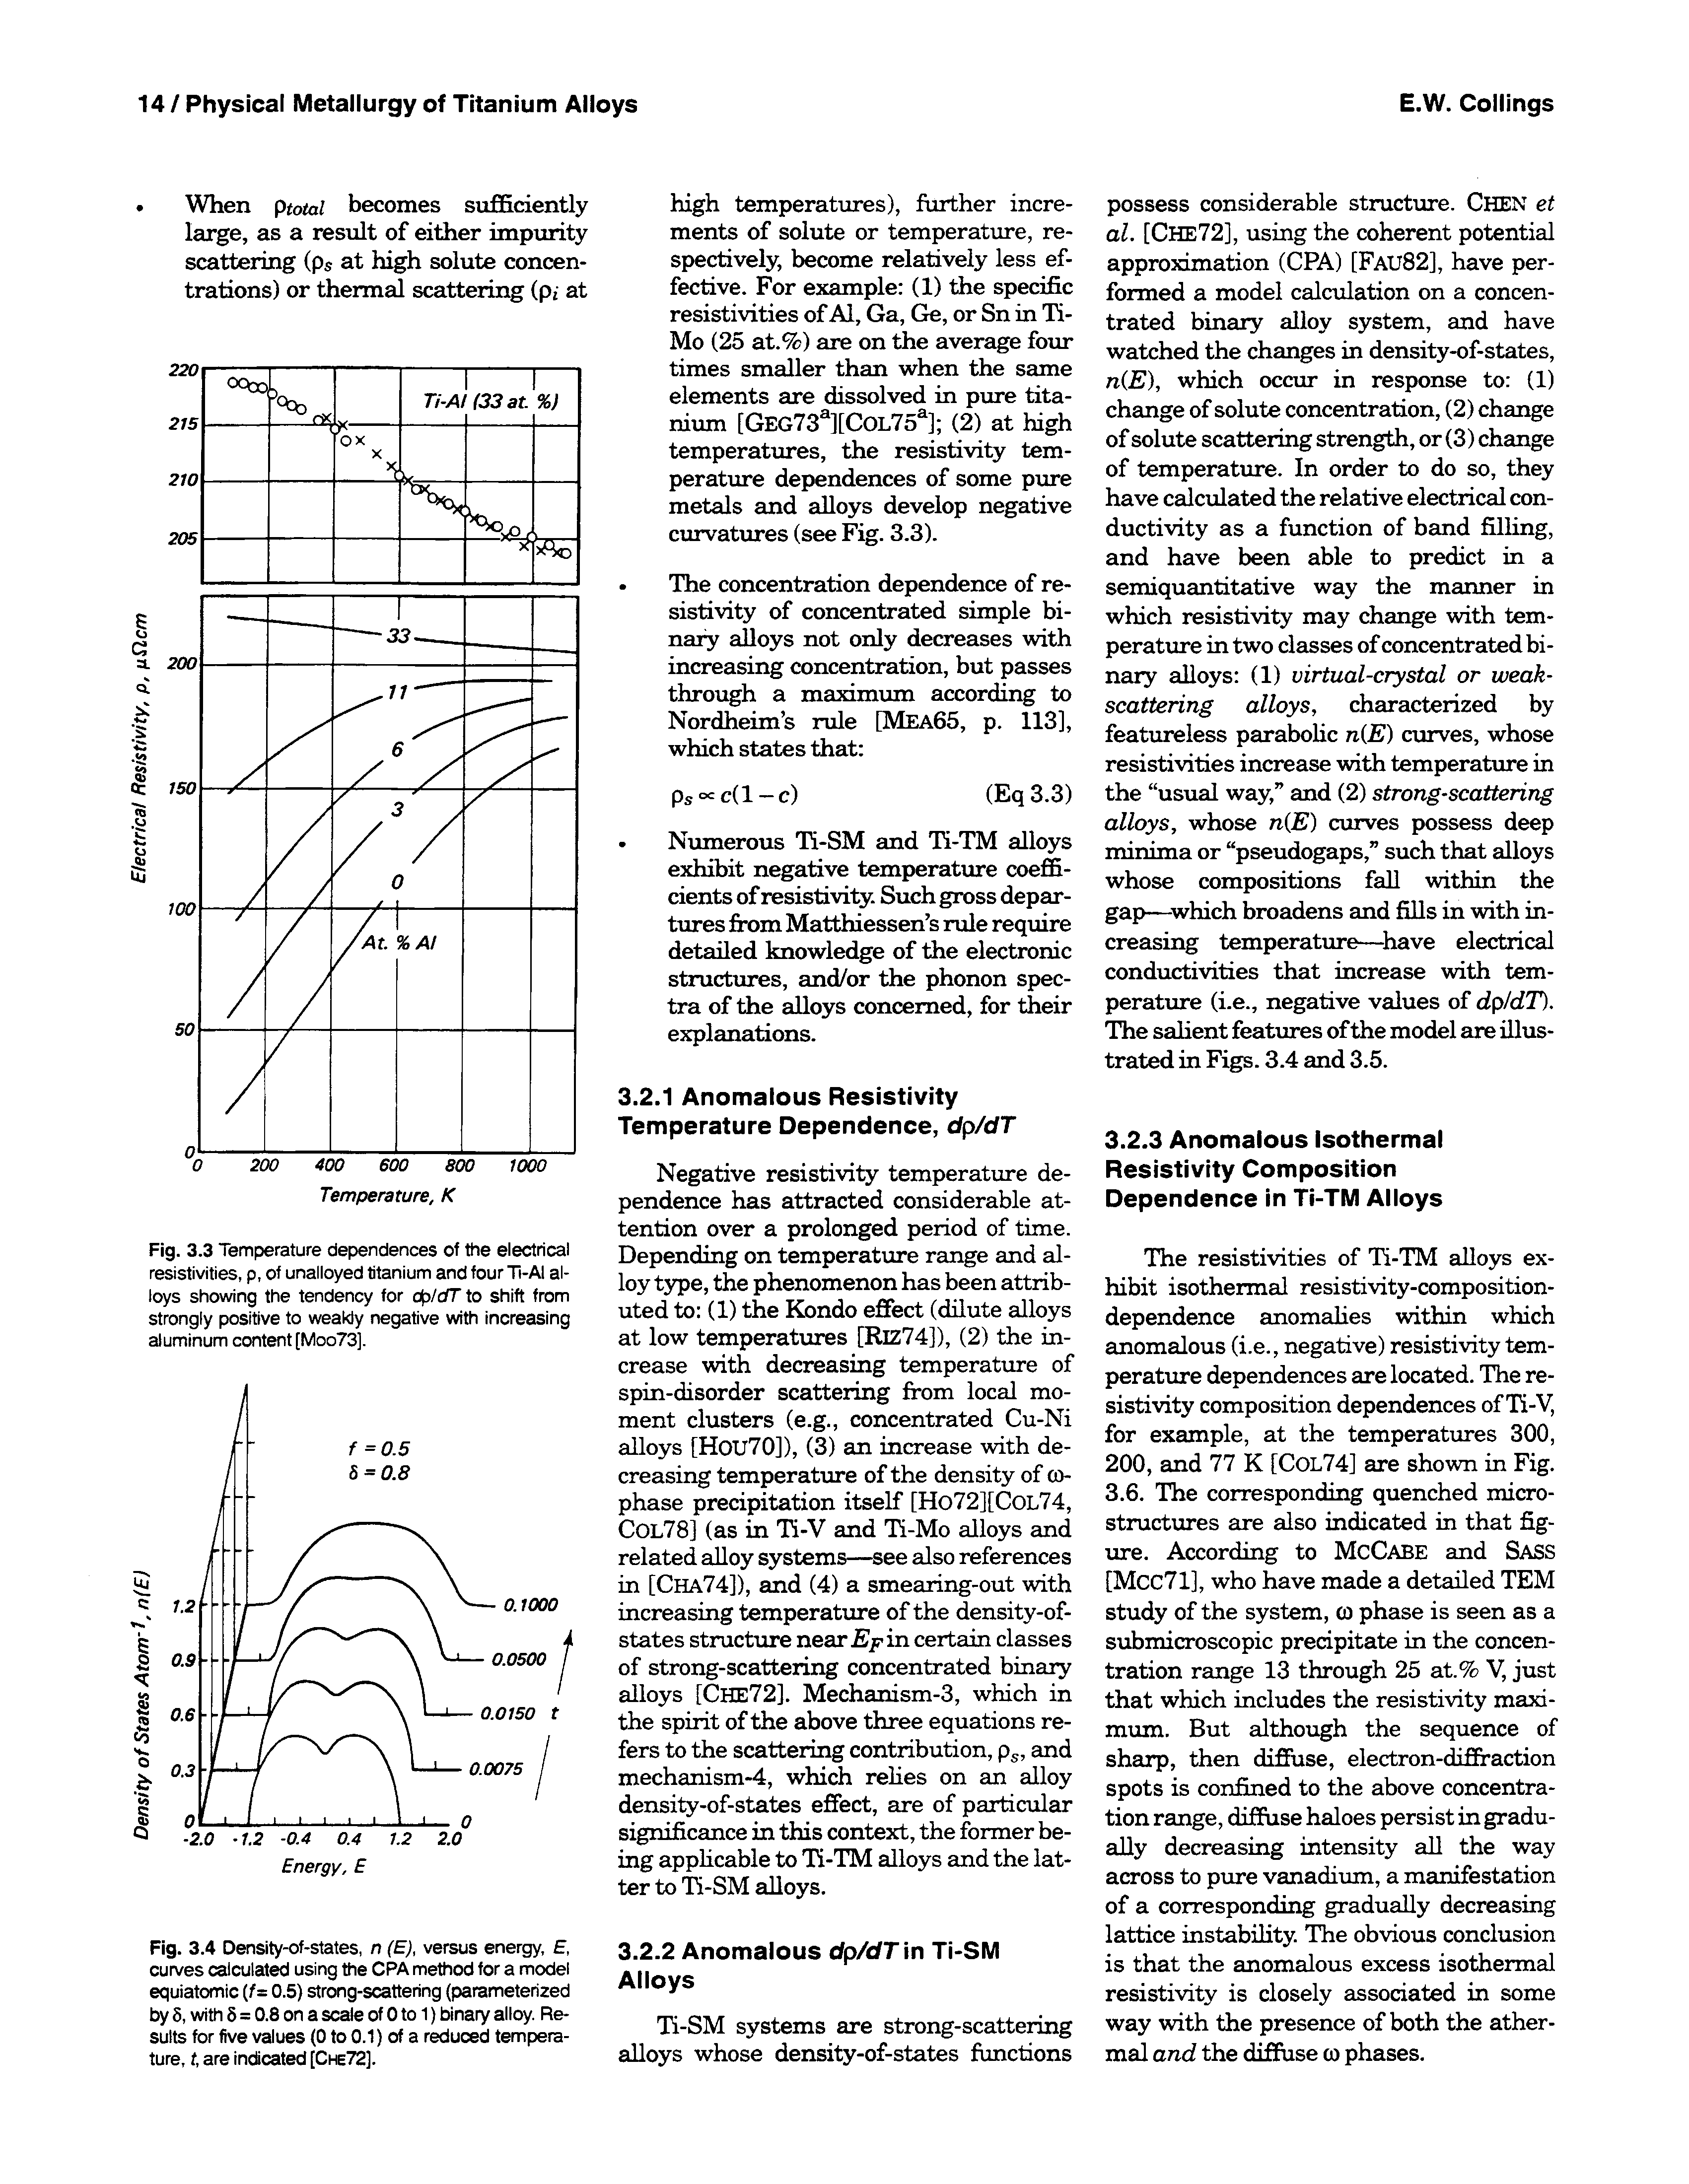 Fig. 3.3 Temperature dependences of the electrical resistivities, p, of unalloyed titanium and four Ti-AI alloys showing the tendency for ppIdT to shift from strongly positive to weakly negative with increasing aluminum content [Moo73].